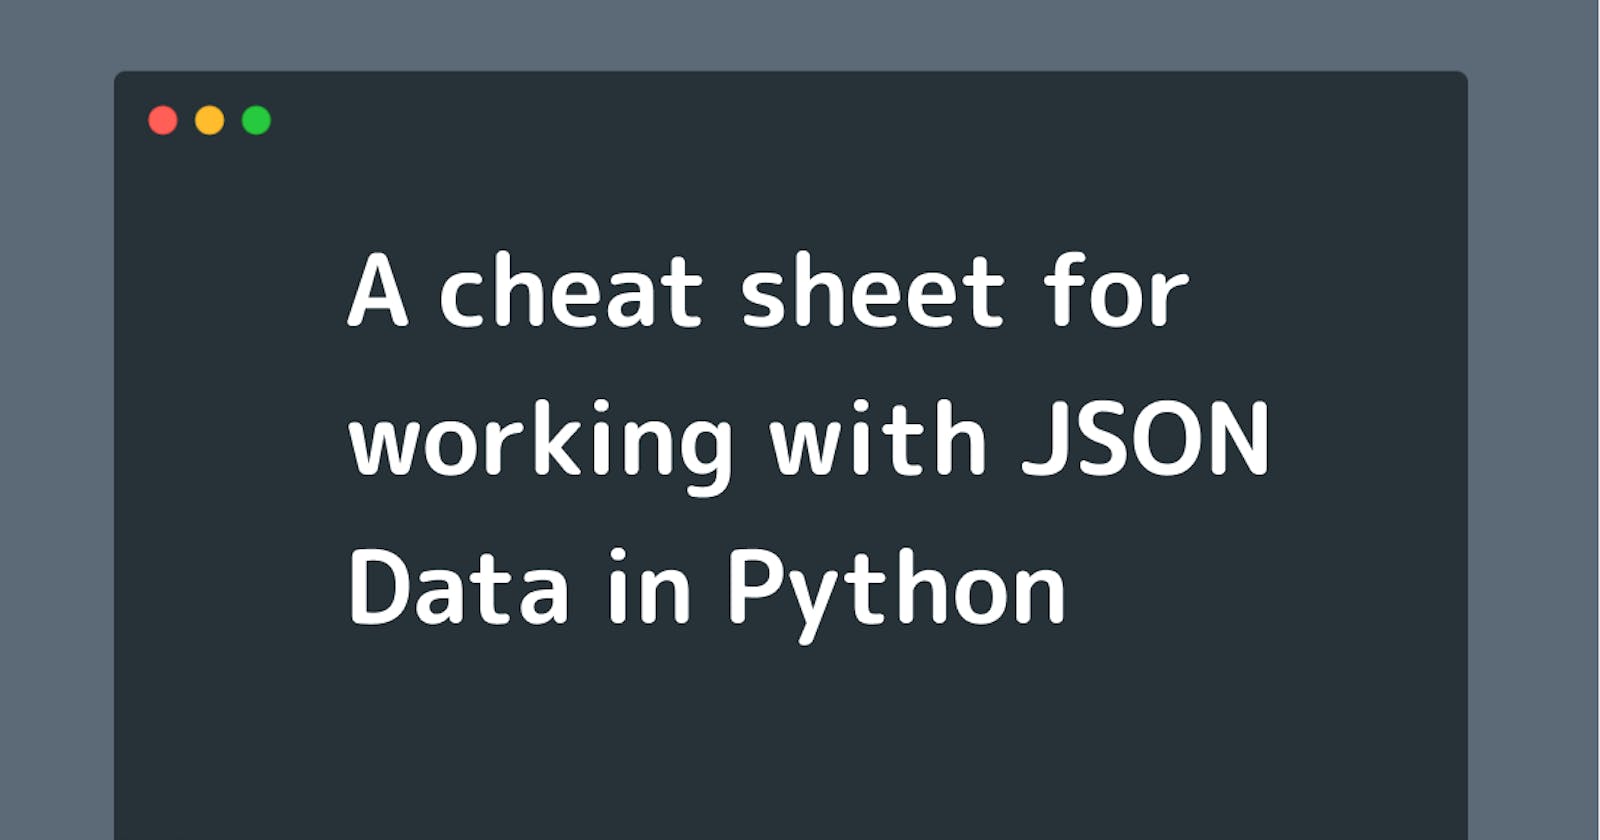 A cheat sheet for working with JSON Data in Python